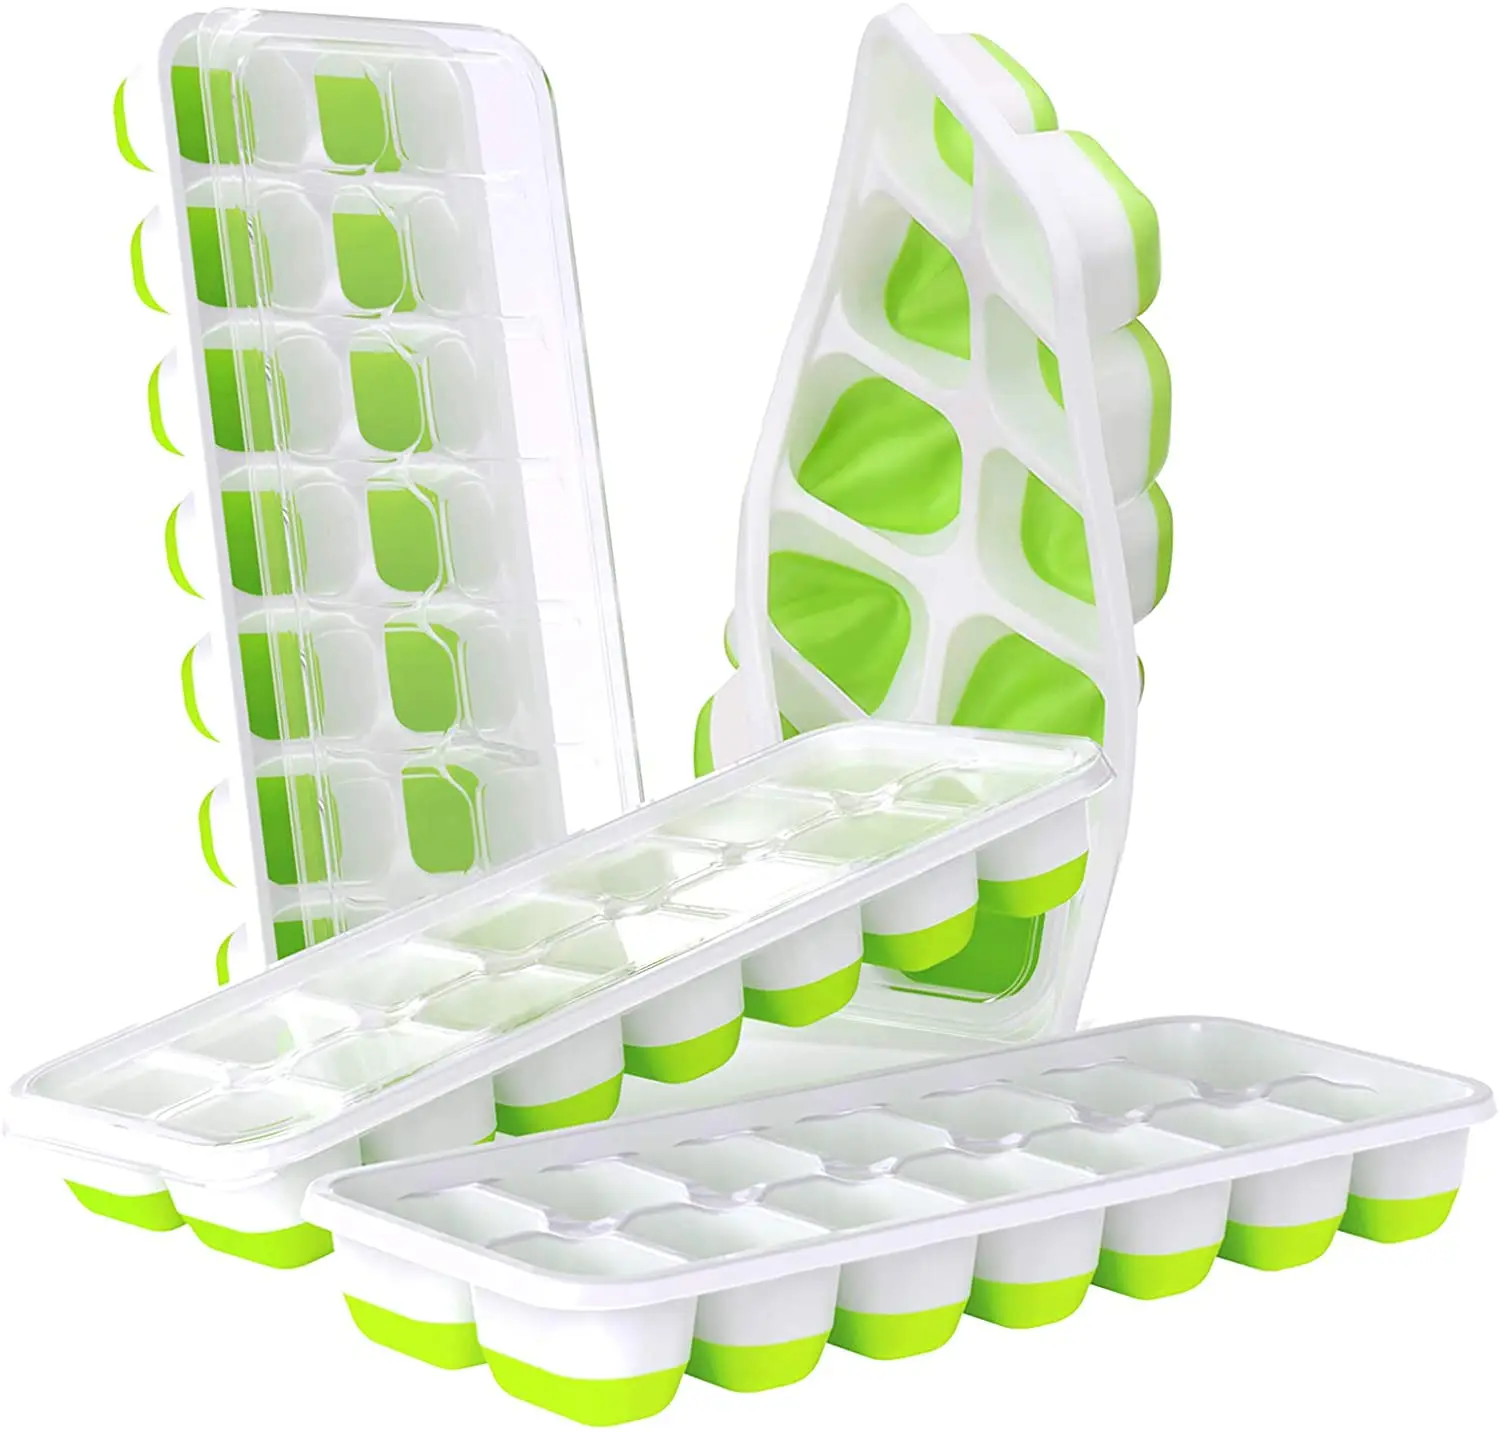 

silicone ice cream mold cube tray Easy-Release Silicone 14-Ice Cube Trays silicone with Spill-Resistant Removable Lid